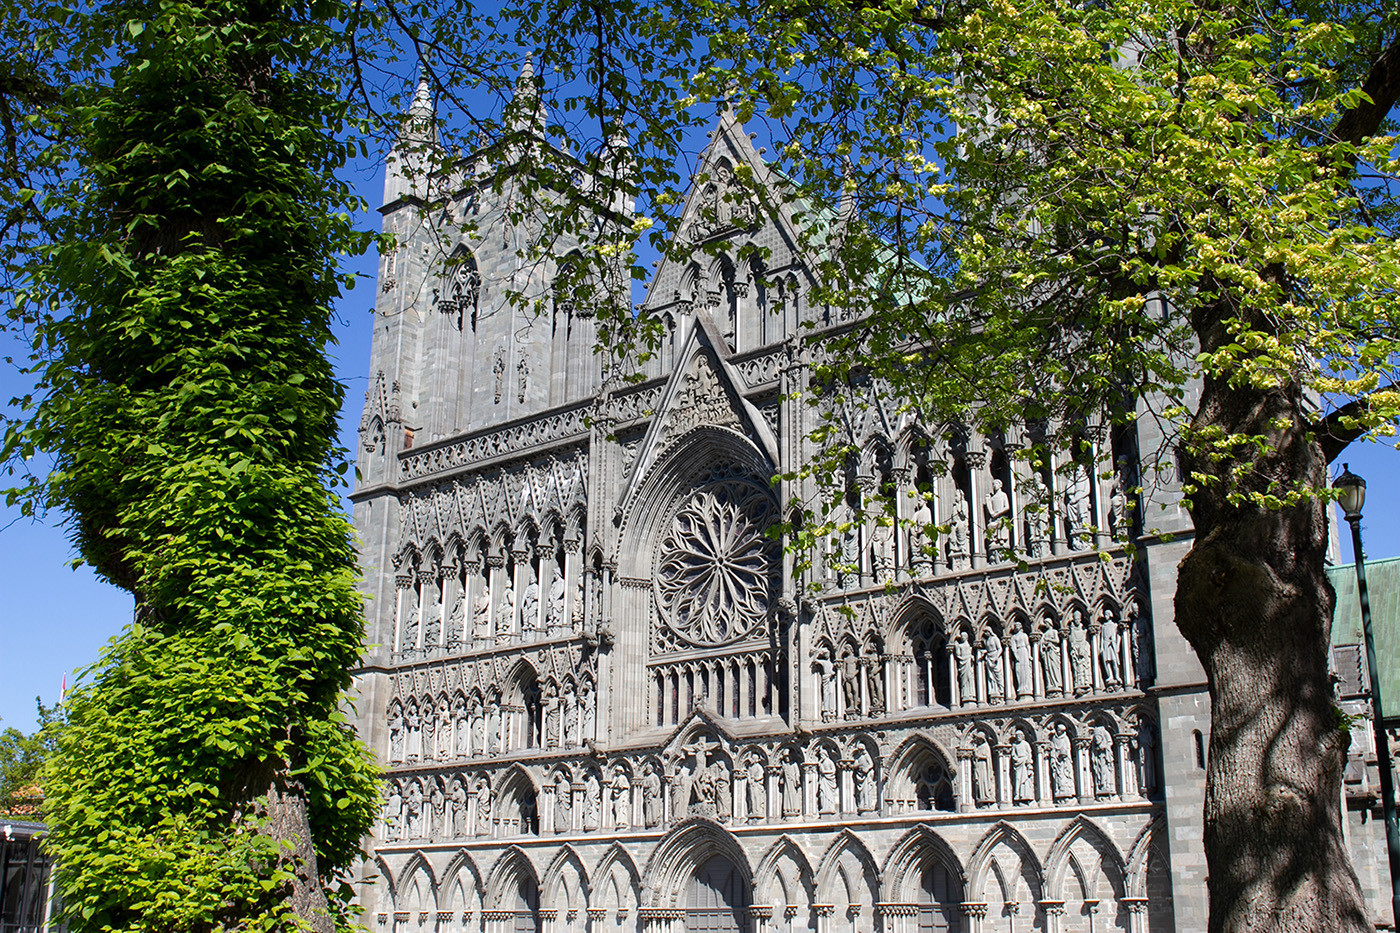 Nidaros Cathedral exterior showing the ornate west wall